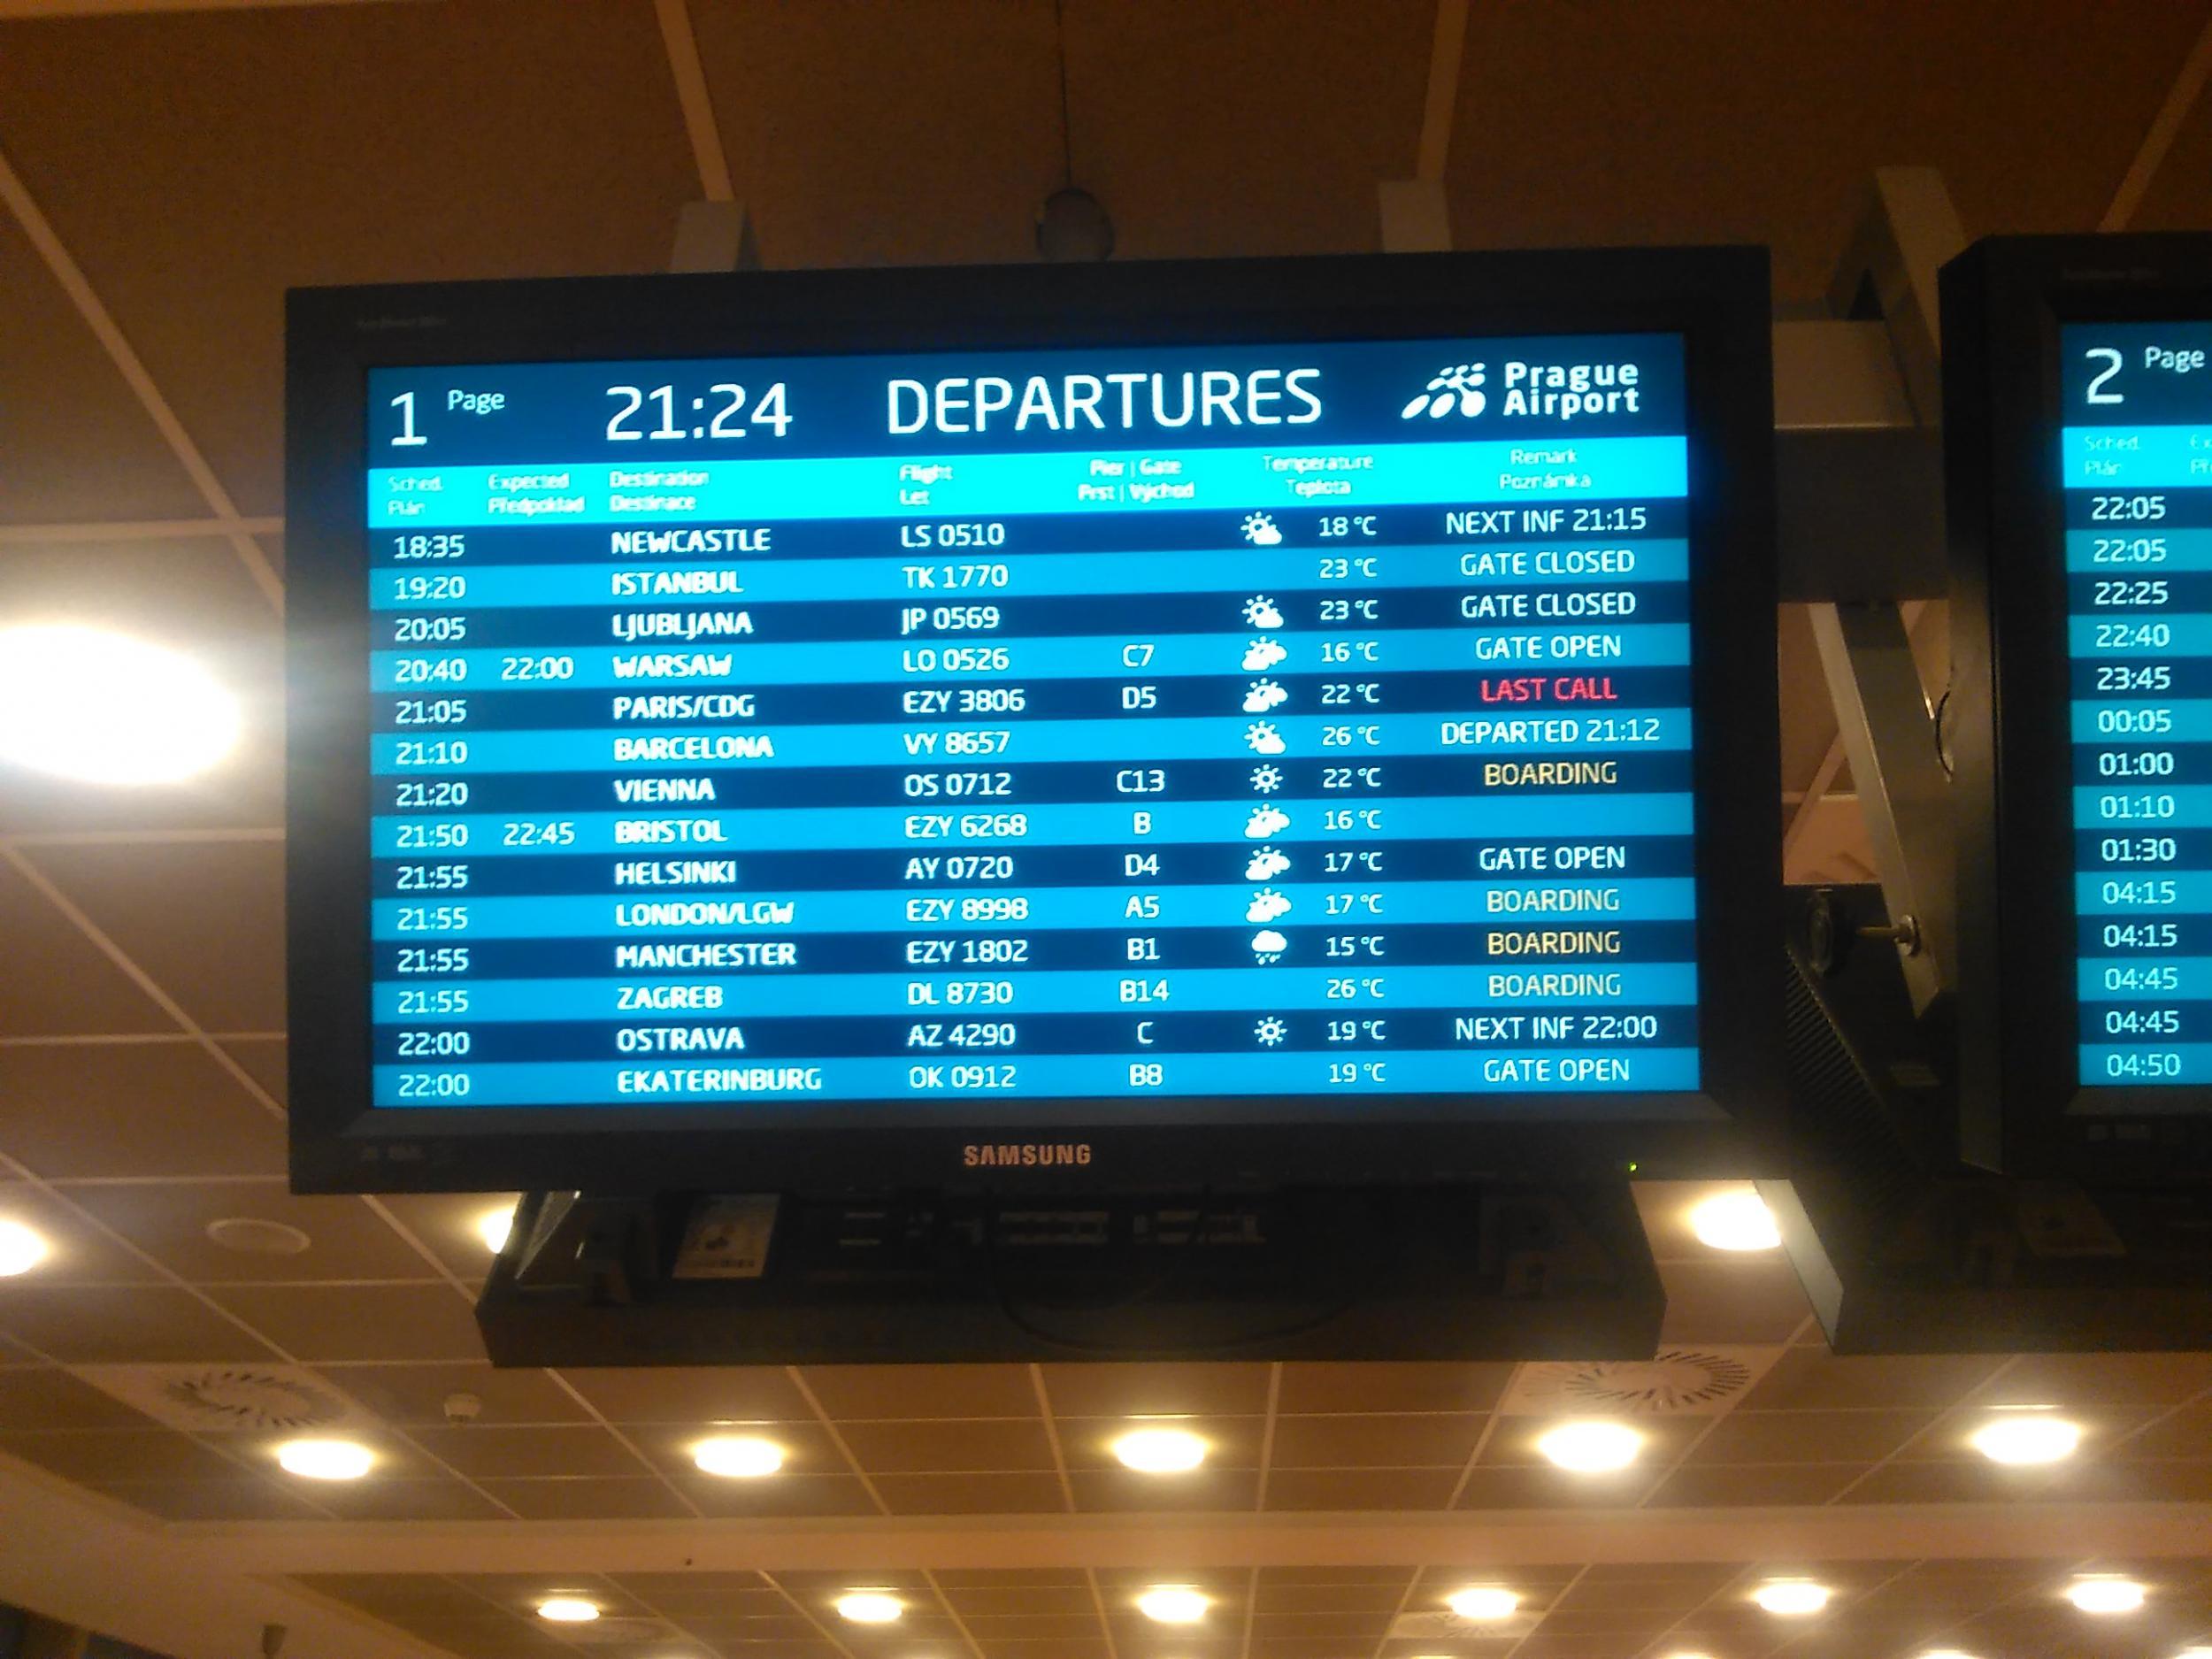 Screens at Prague airport showed the flight as delayed